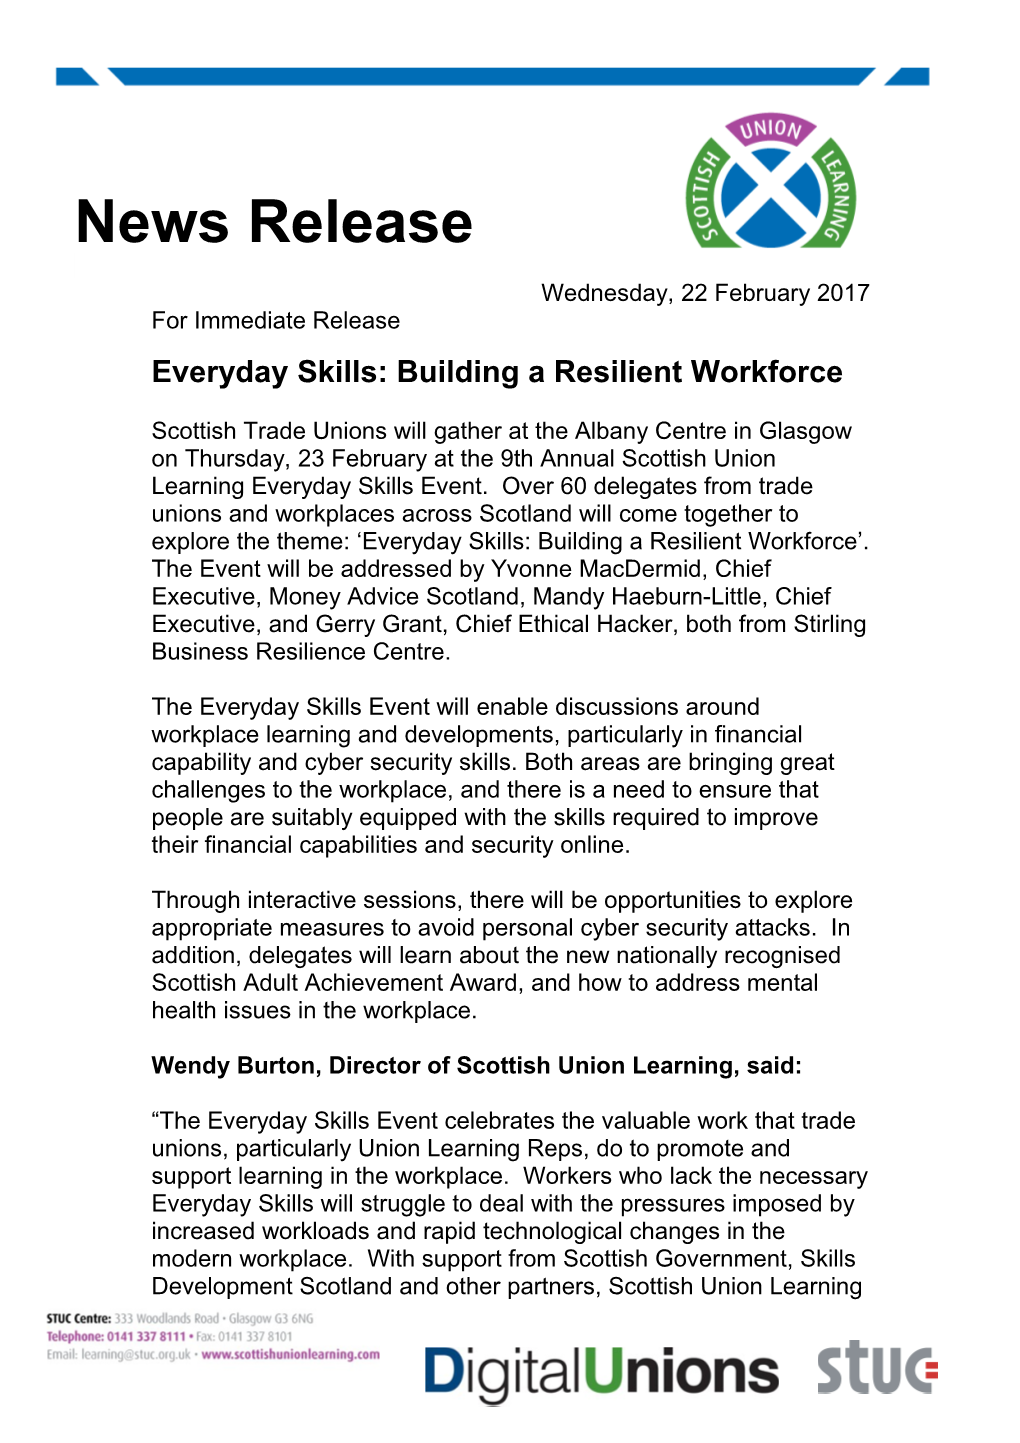 Everyday Skills: Building a Resilient Workforce